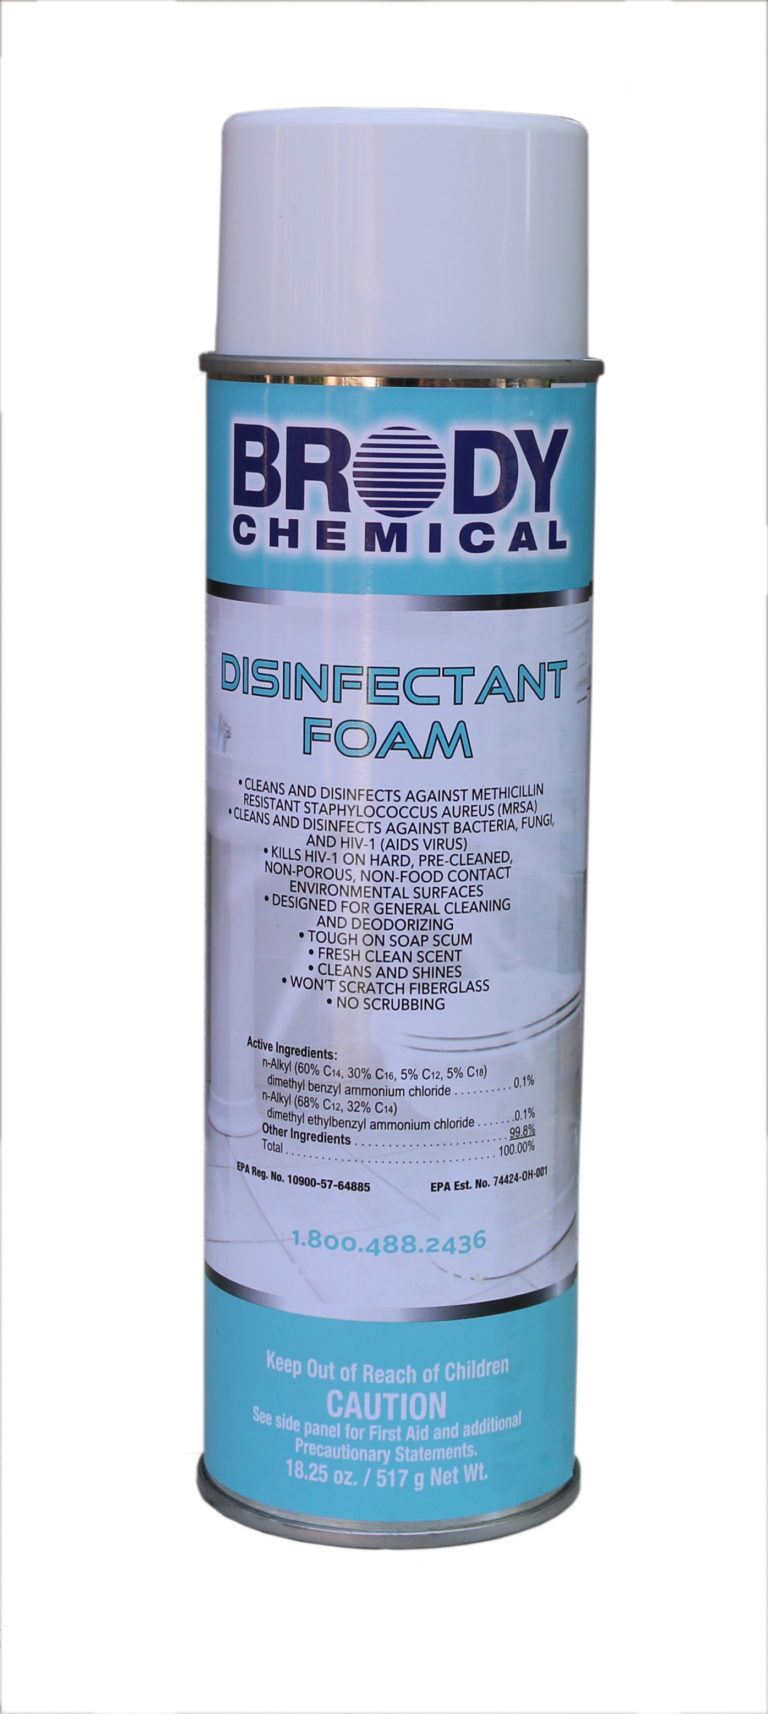 Can of Brody Chemical's Disinfectant Foam product